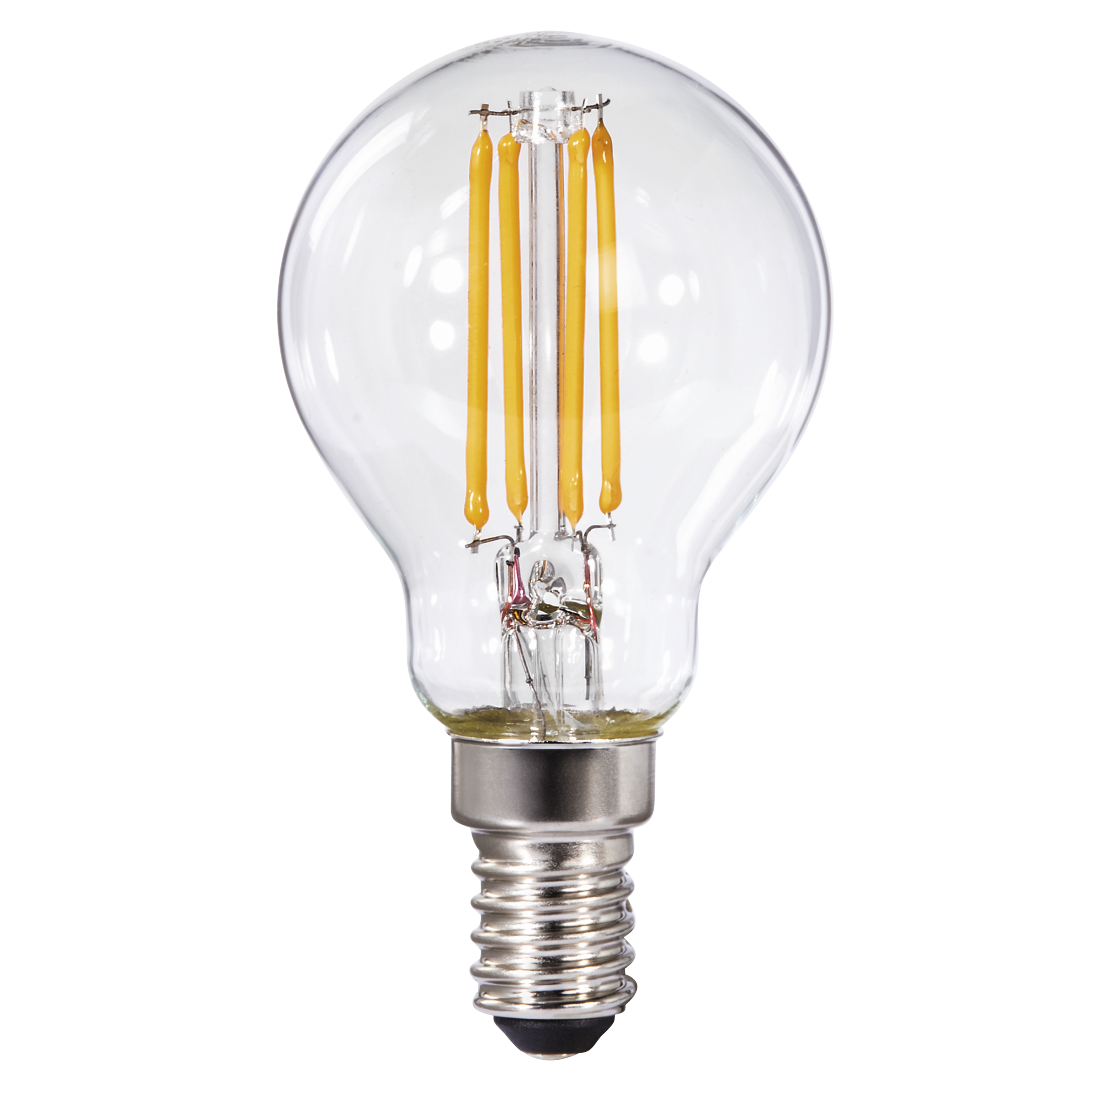 abx High-Res Image - Xavax, LED Filament, E14, 470 lm Replaces 40W, Drop Bulb, warm white